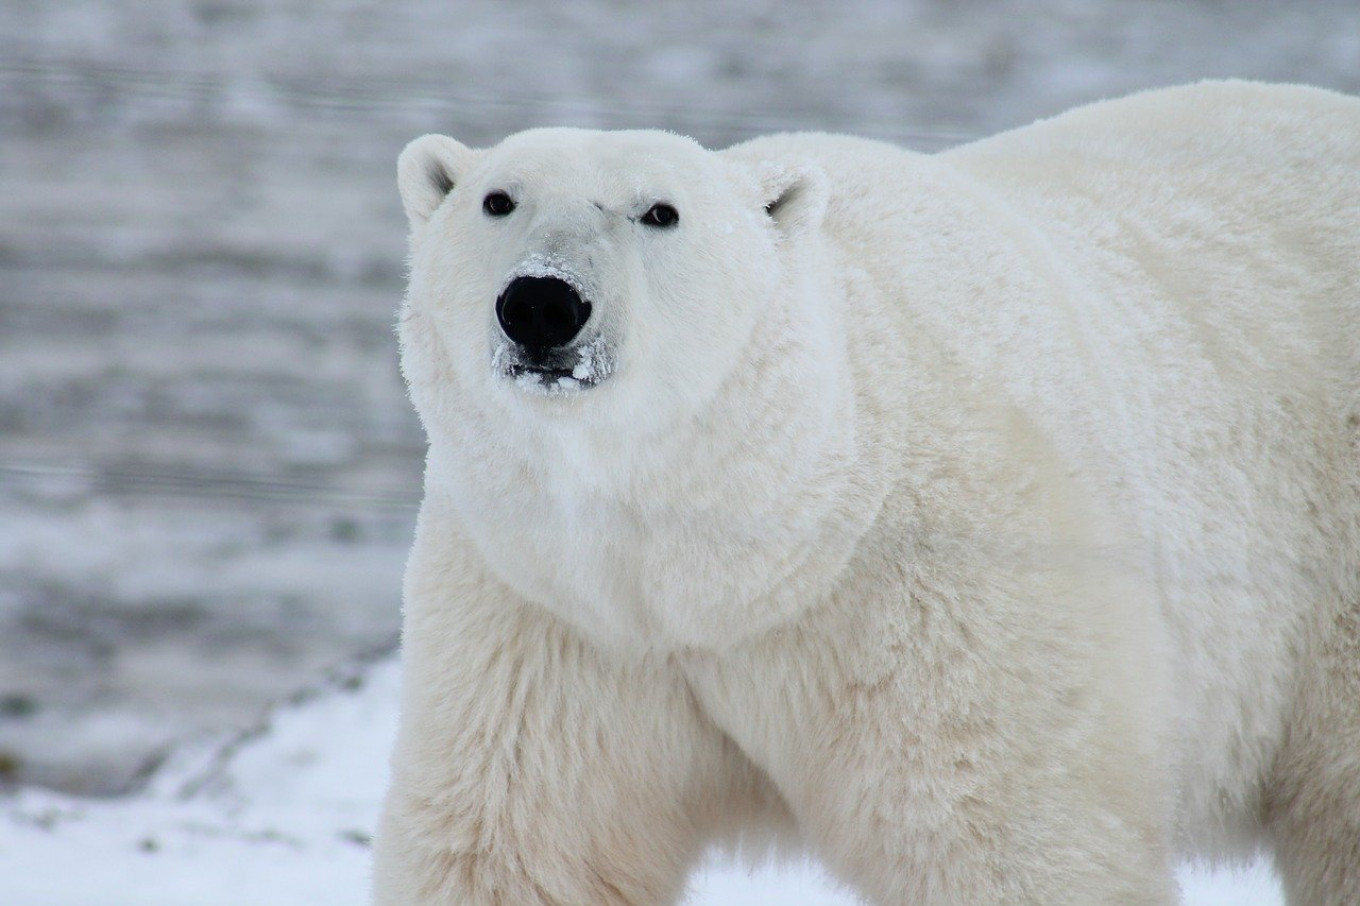 Melting Arctic Forces Polar Bears to Adapt to Land-Based Diet – Russian Scientists